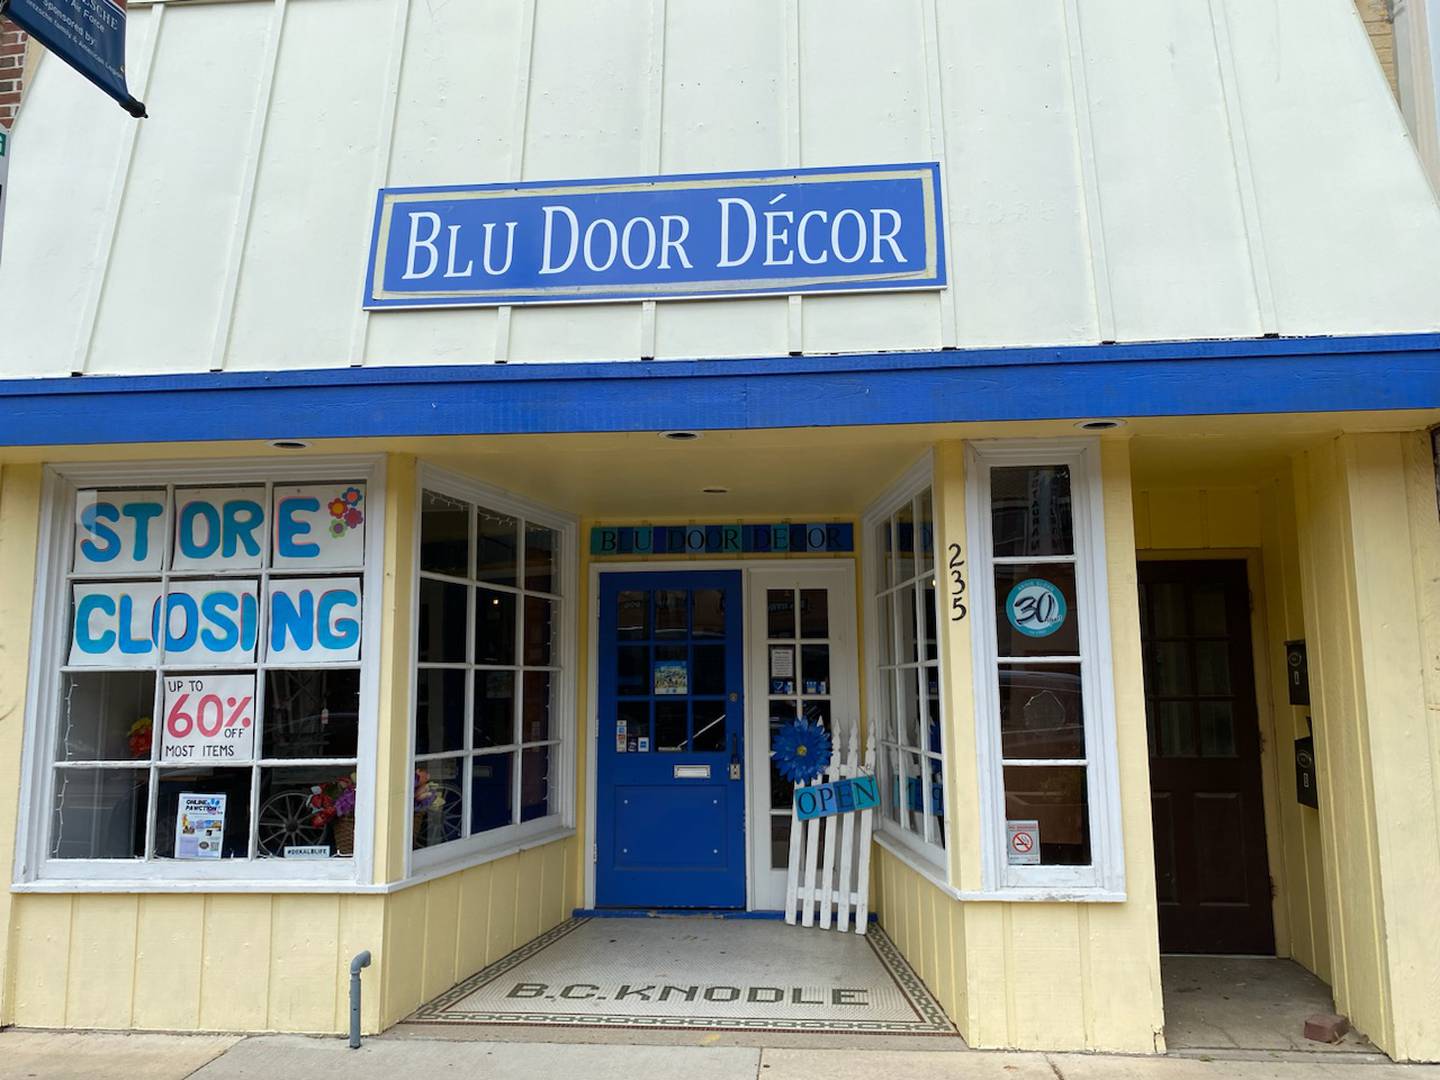 Blu Door Decor, 235 E. Lincoln Highway in downtown DeKalb, seen here Thursday, July 6, 2023 has announced its impending closure.